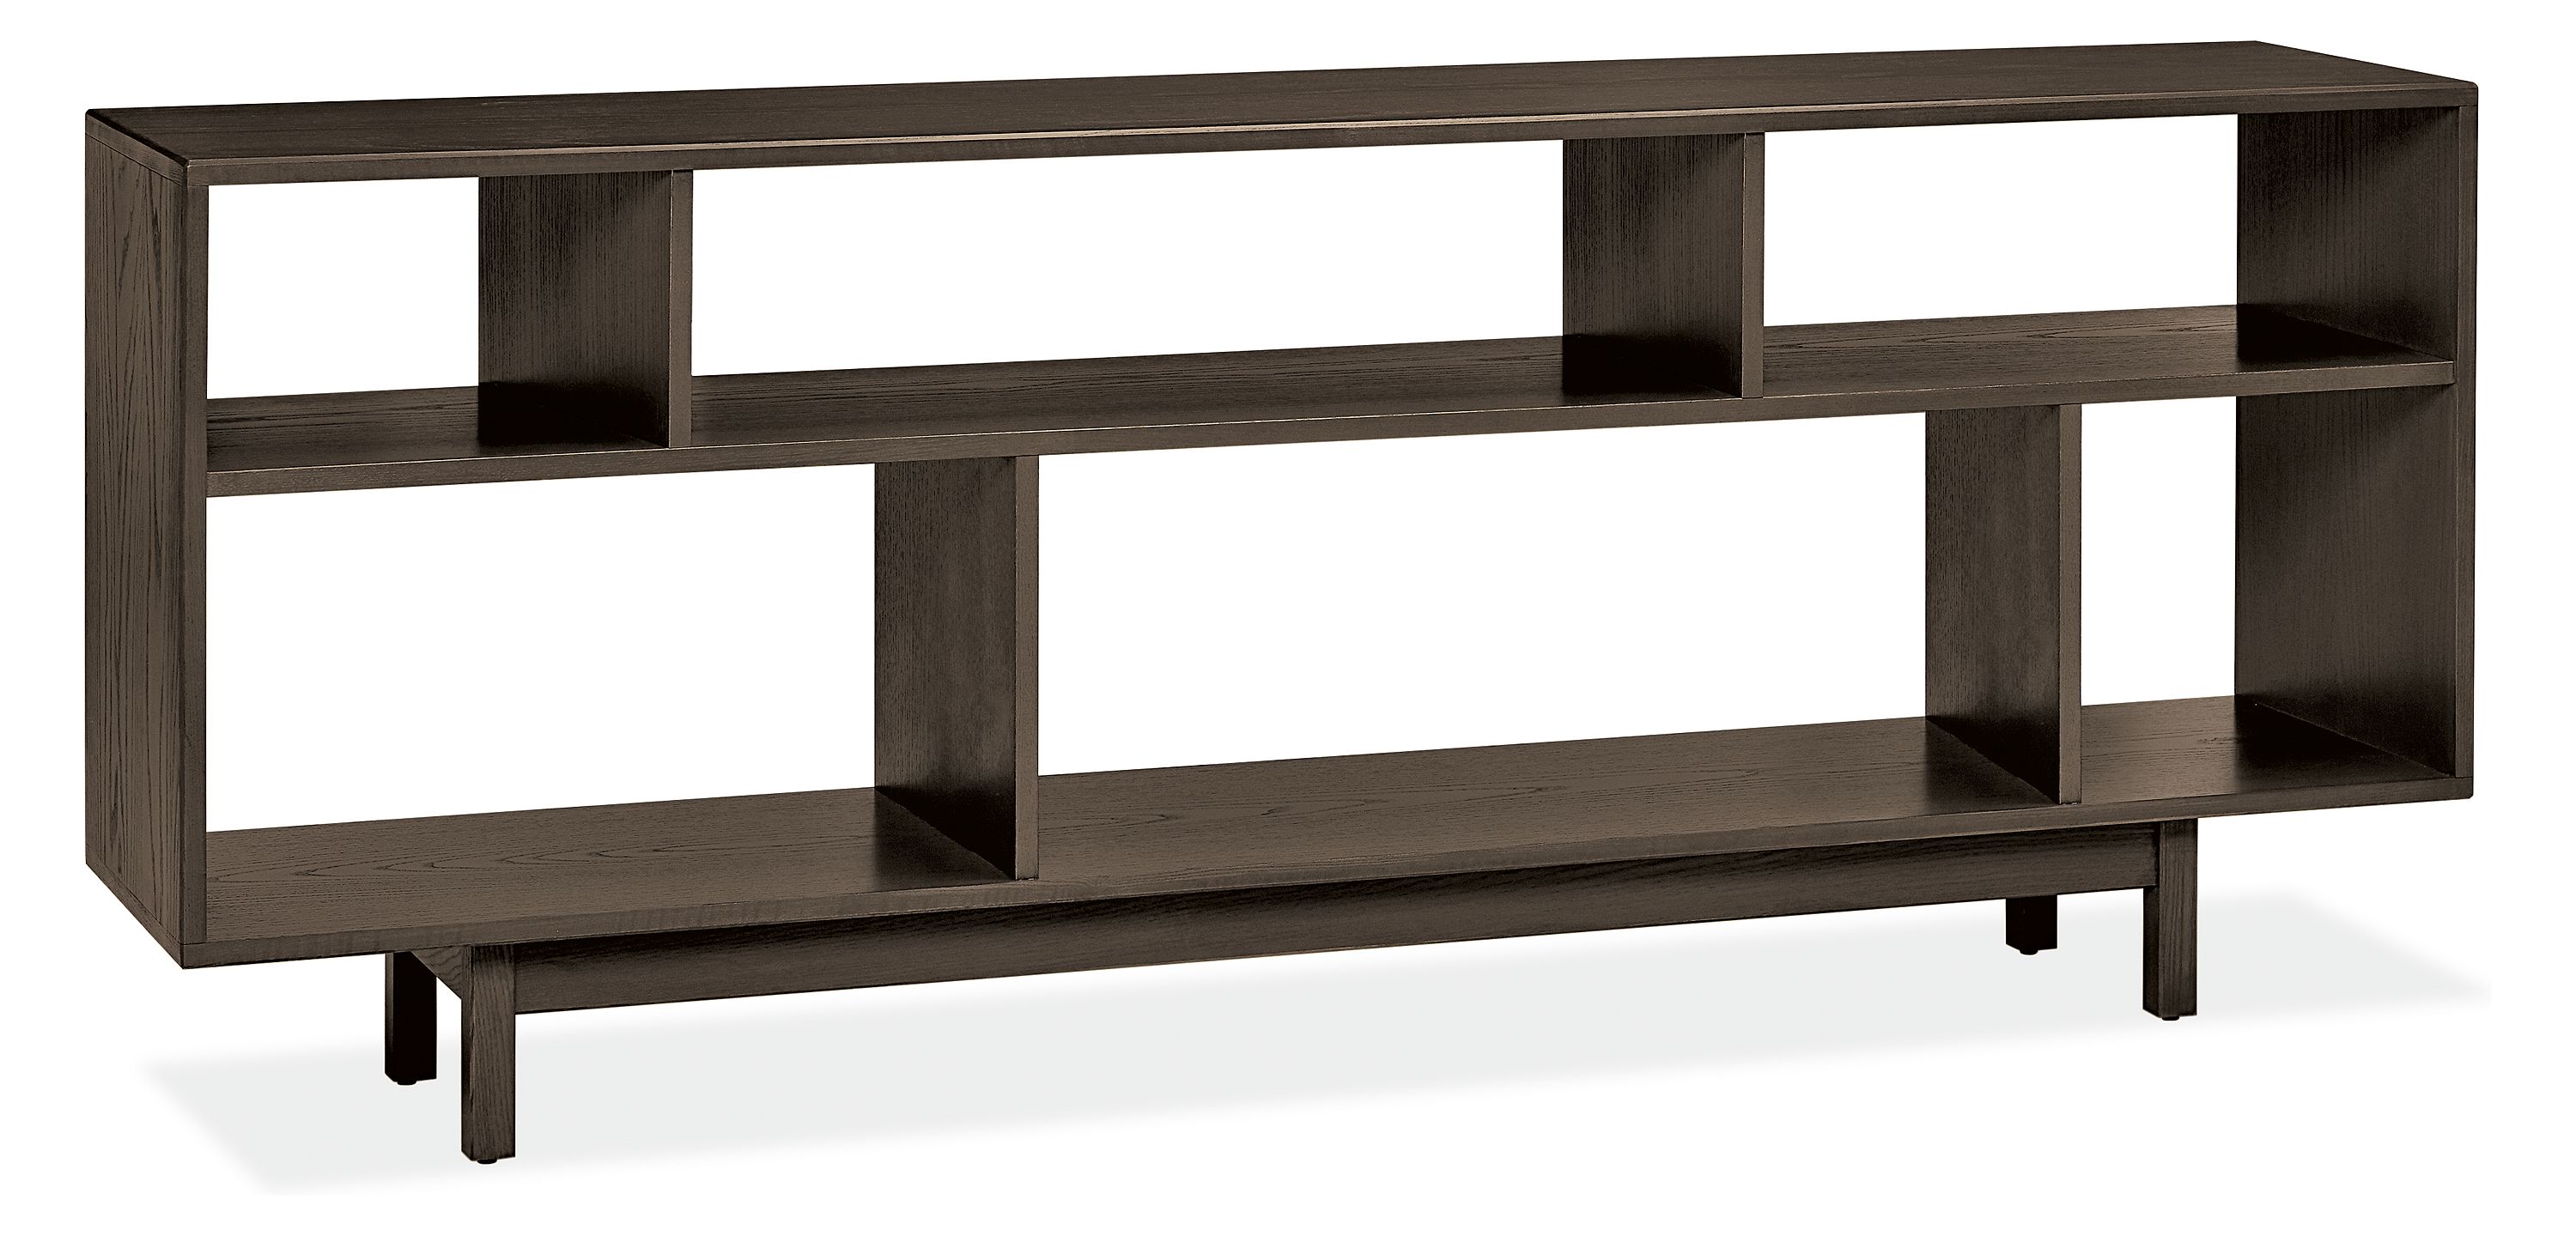 Dahl Console Bookcases Modern Bookcases Shelving Modern